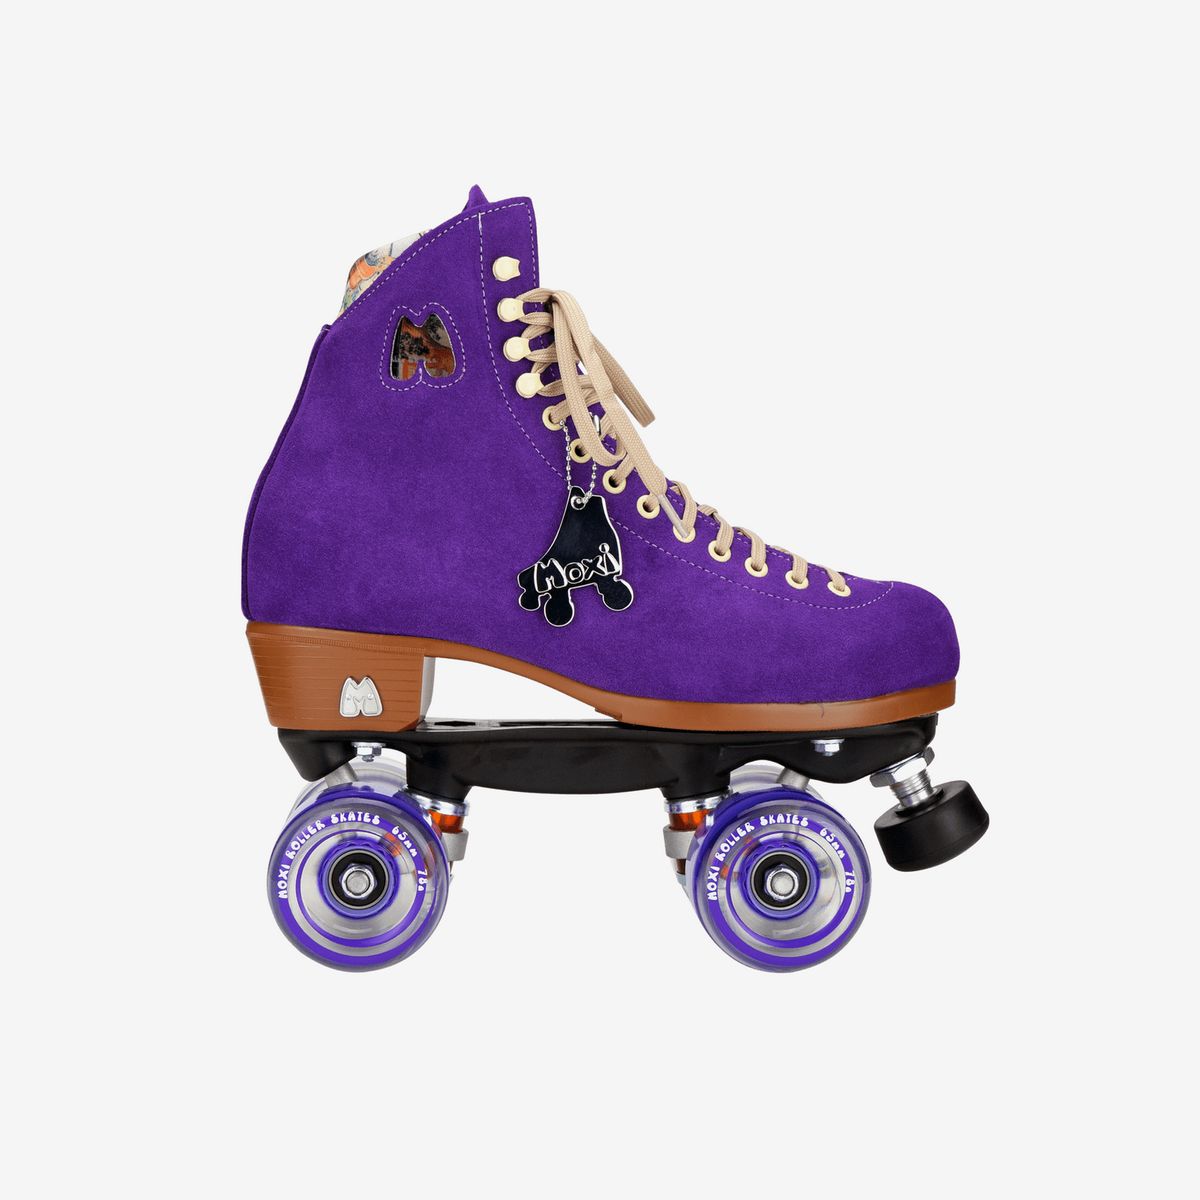 Professional Indoor Double Row Skates for Beginner Adults Girls Unisex with Bag Outdoor High Top Leather Street Women Skates XUDREZ Roller Skates for Women